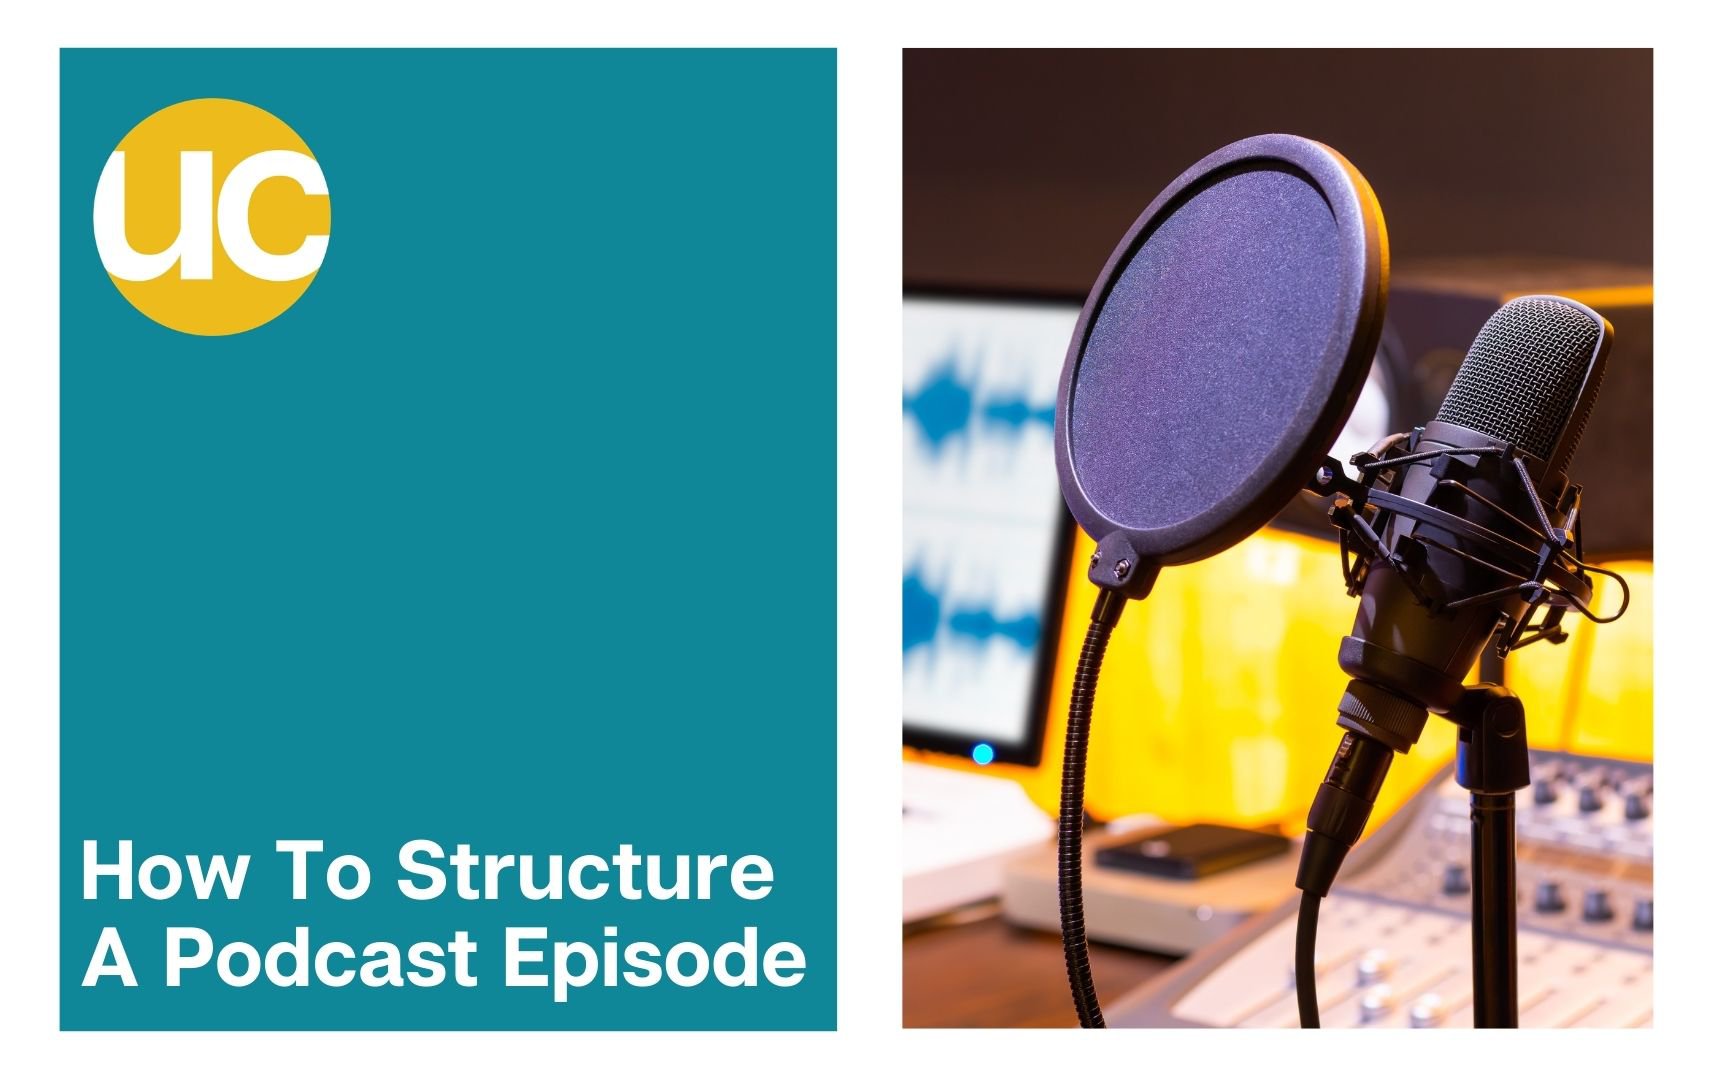 How To Structure A Podcast Episode in 19 Easy Steps